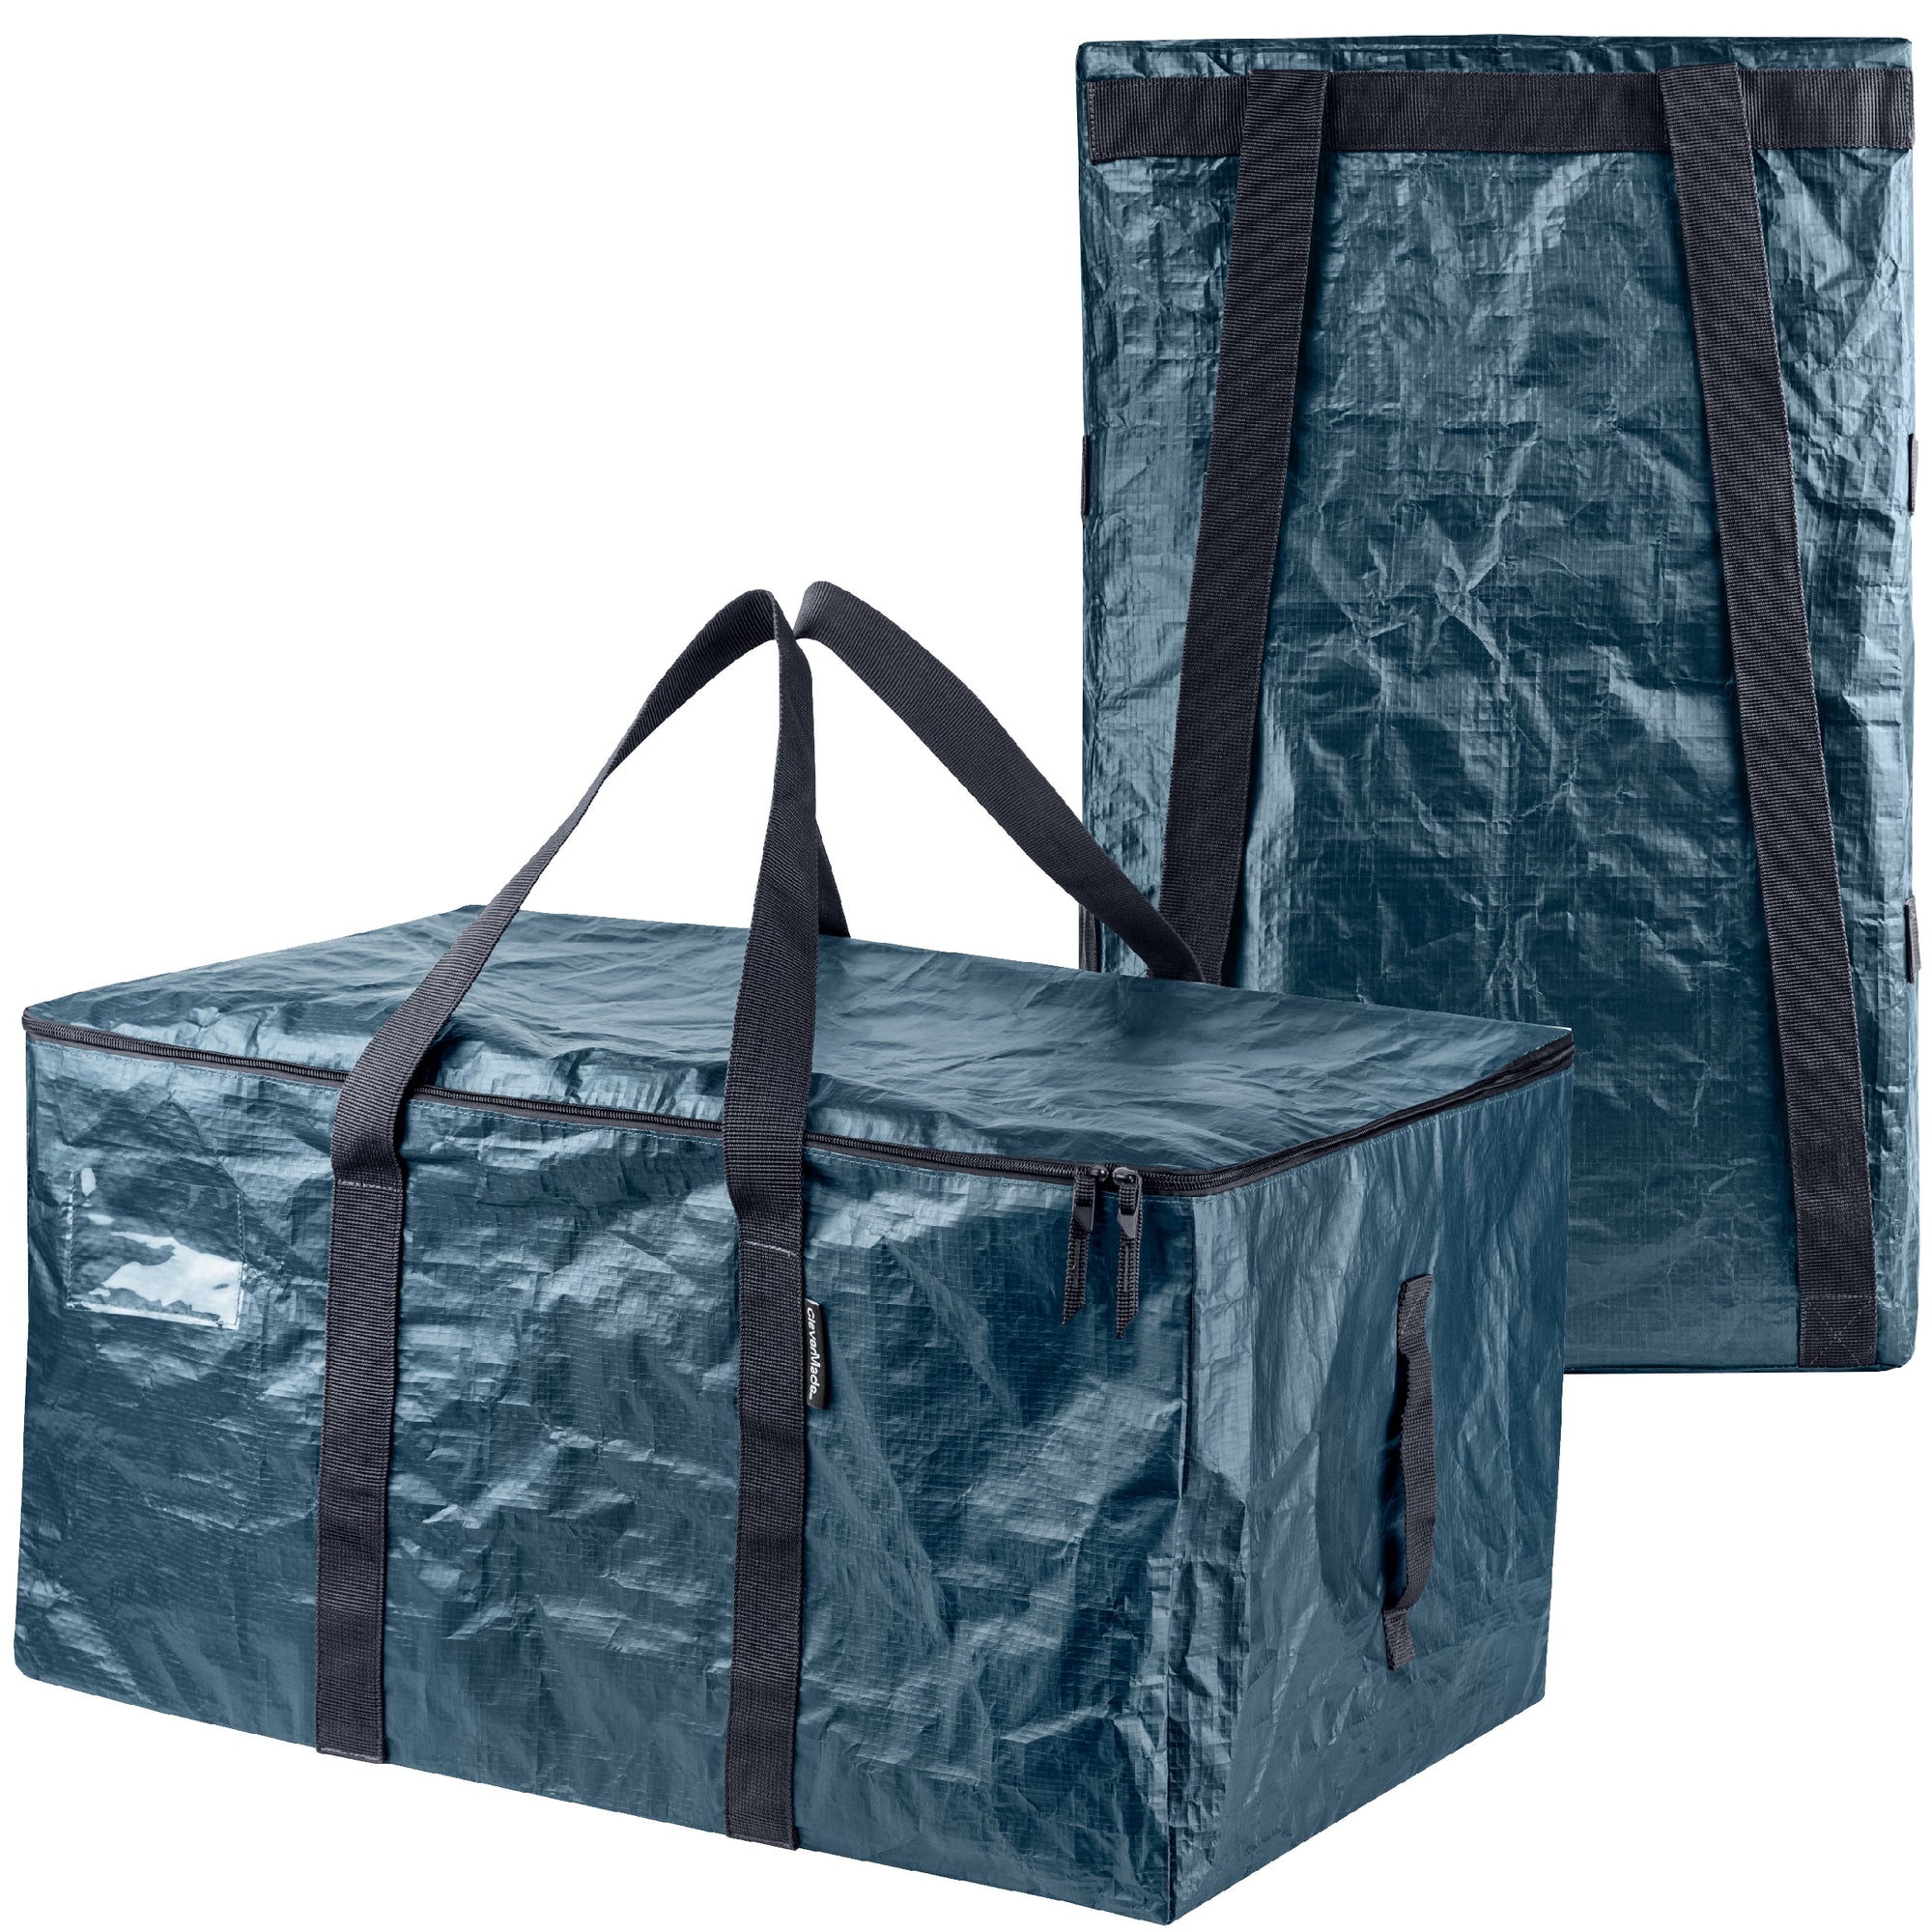 Recertified - Clevermade Eco 24L Collapsible Reusable Plastic Grocery Shopping Baskets 3 Pack